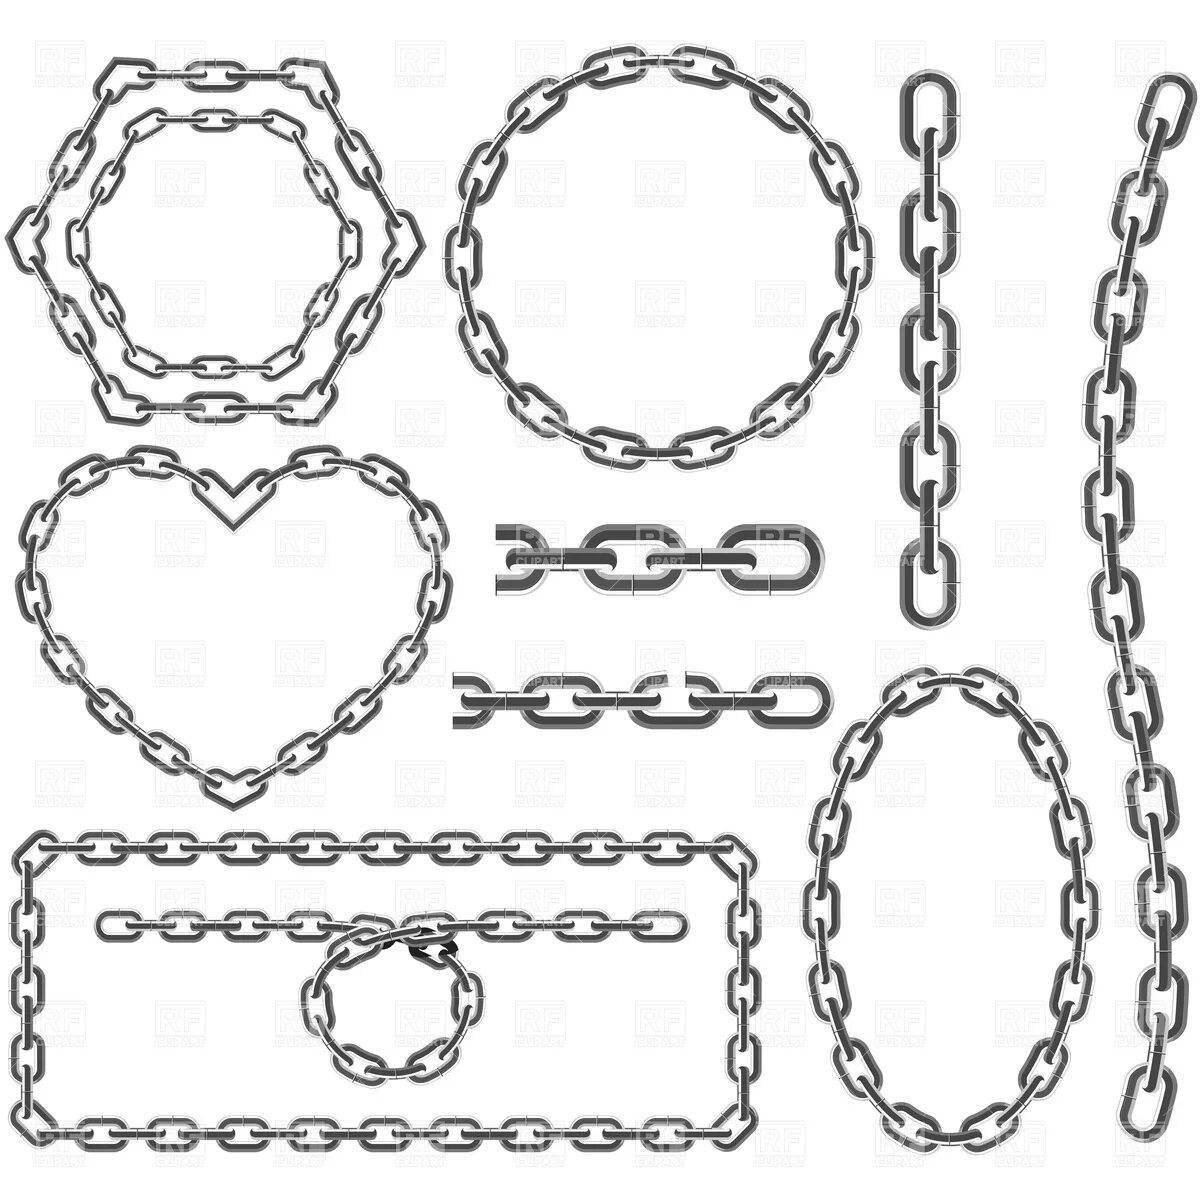 Complex chain coloring page